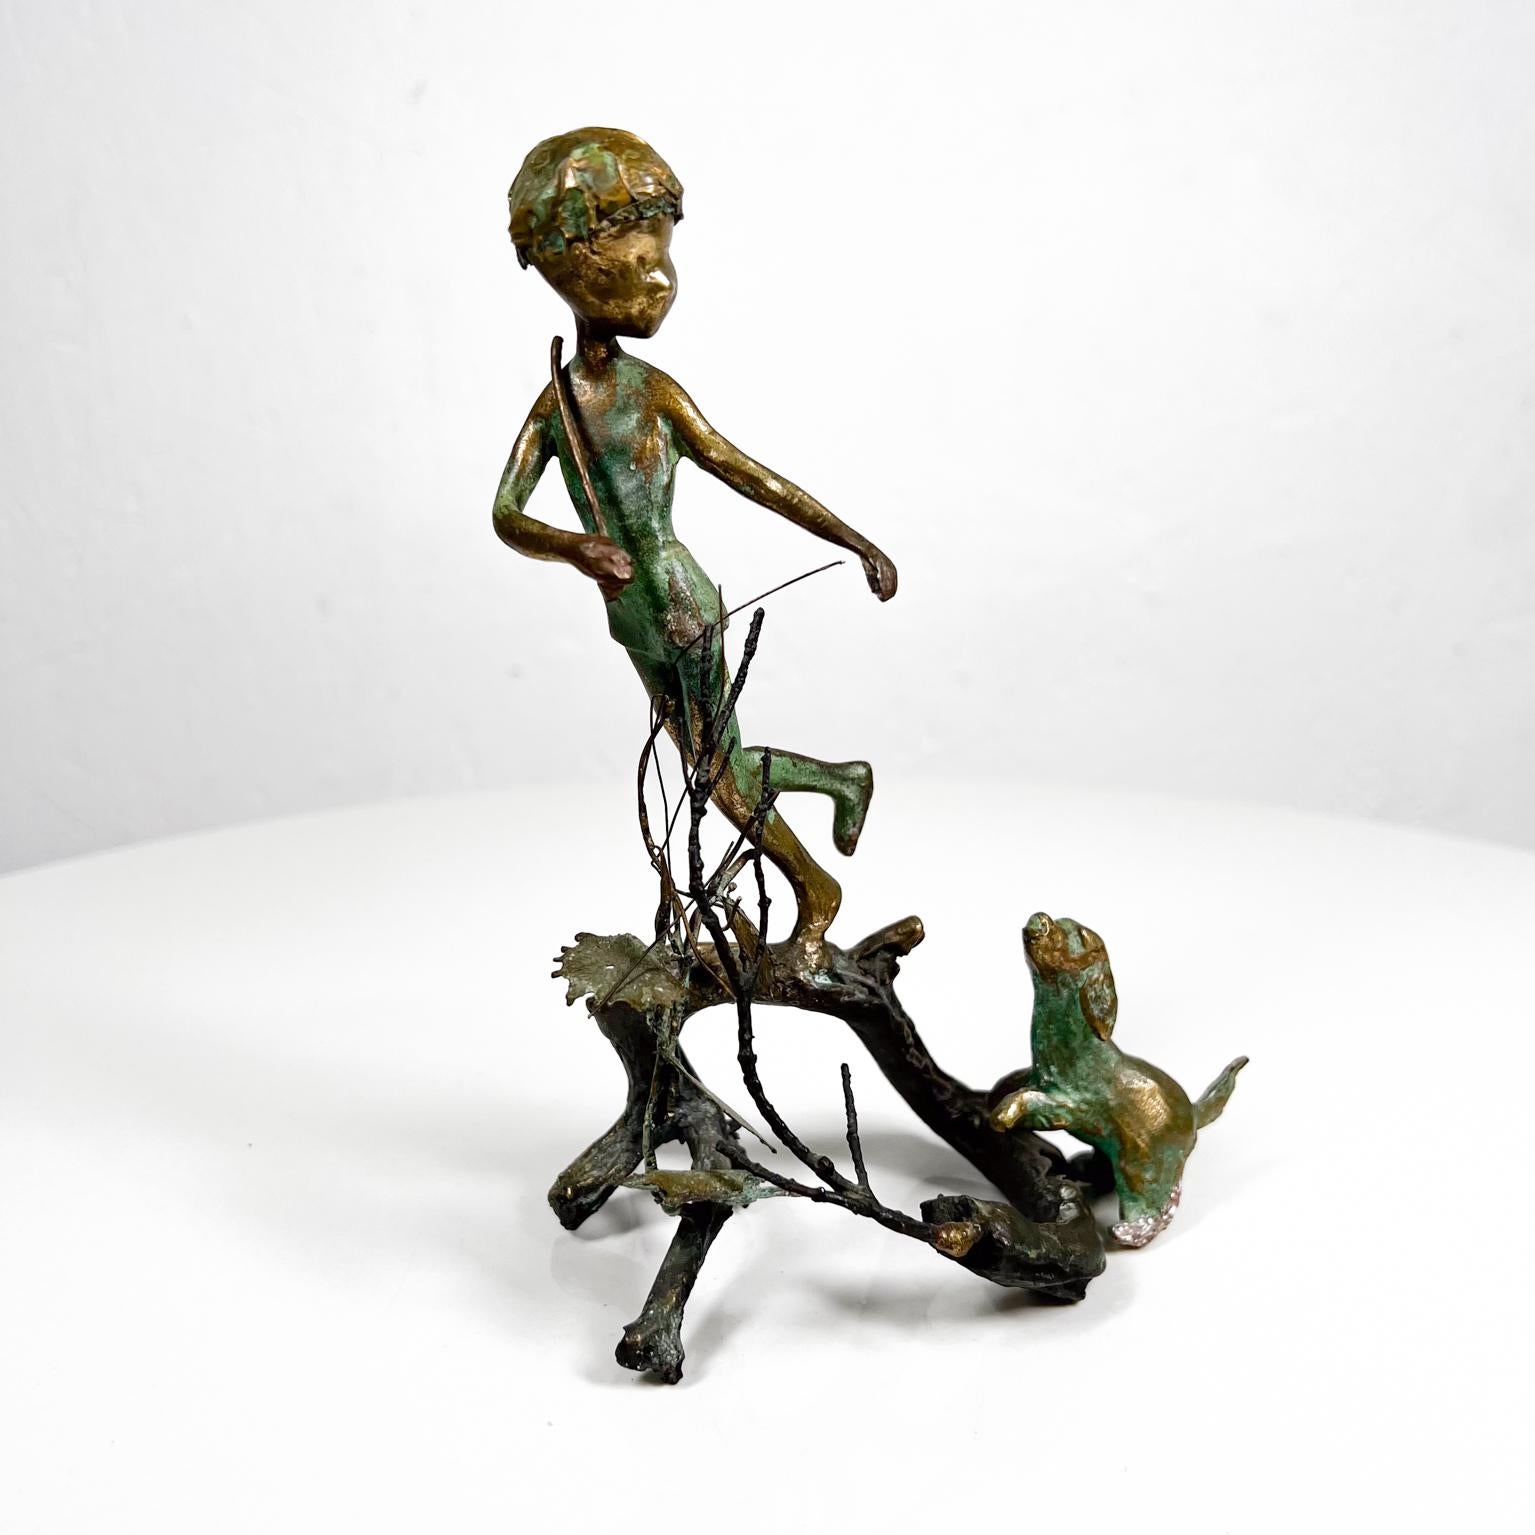 Art of Malcolm Moran patinated bronze sculpture: boy on tree branch with his dog
Verdigris patinated bronze.
Signed art
7 Tall x 5.5 W x 3 D
Original preowned unrestored vintage condition.
See our images provided.